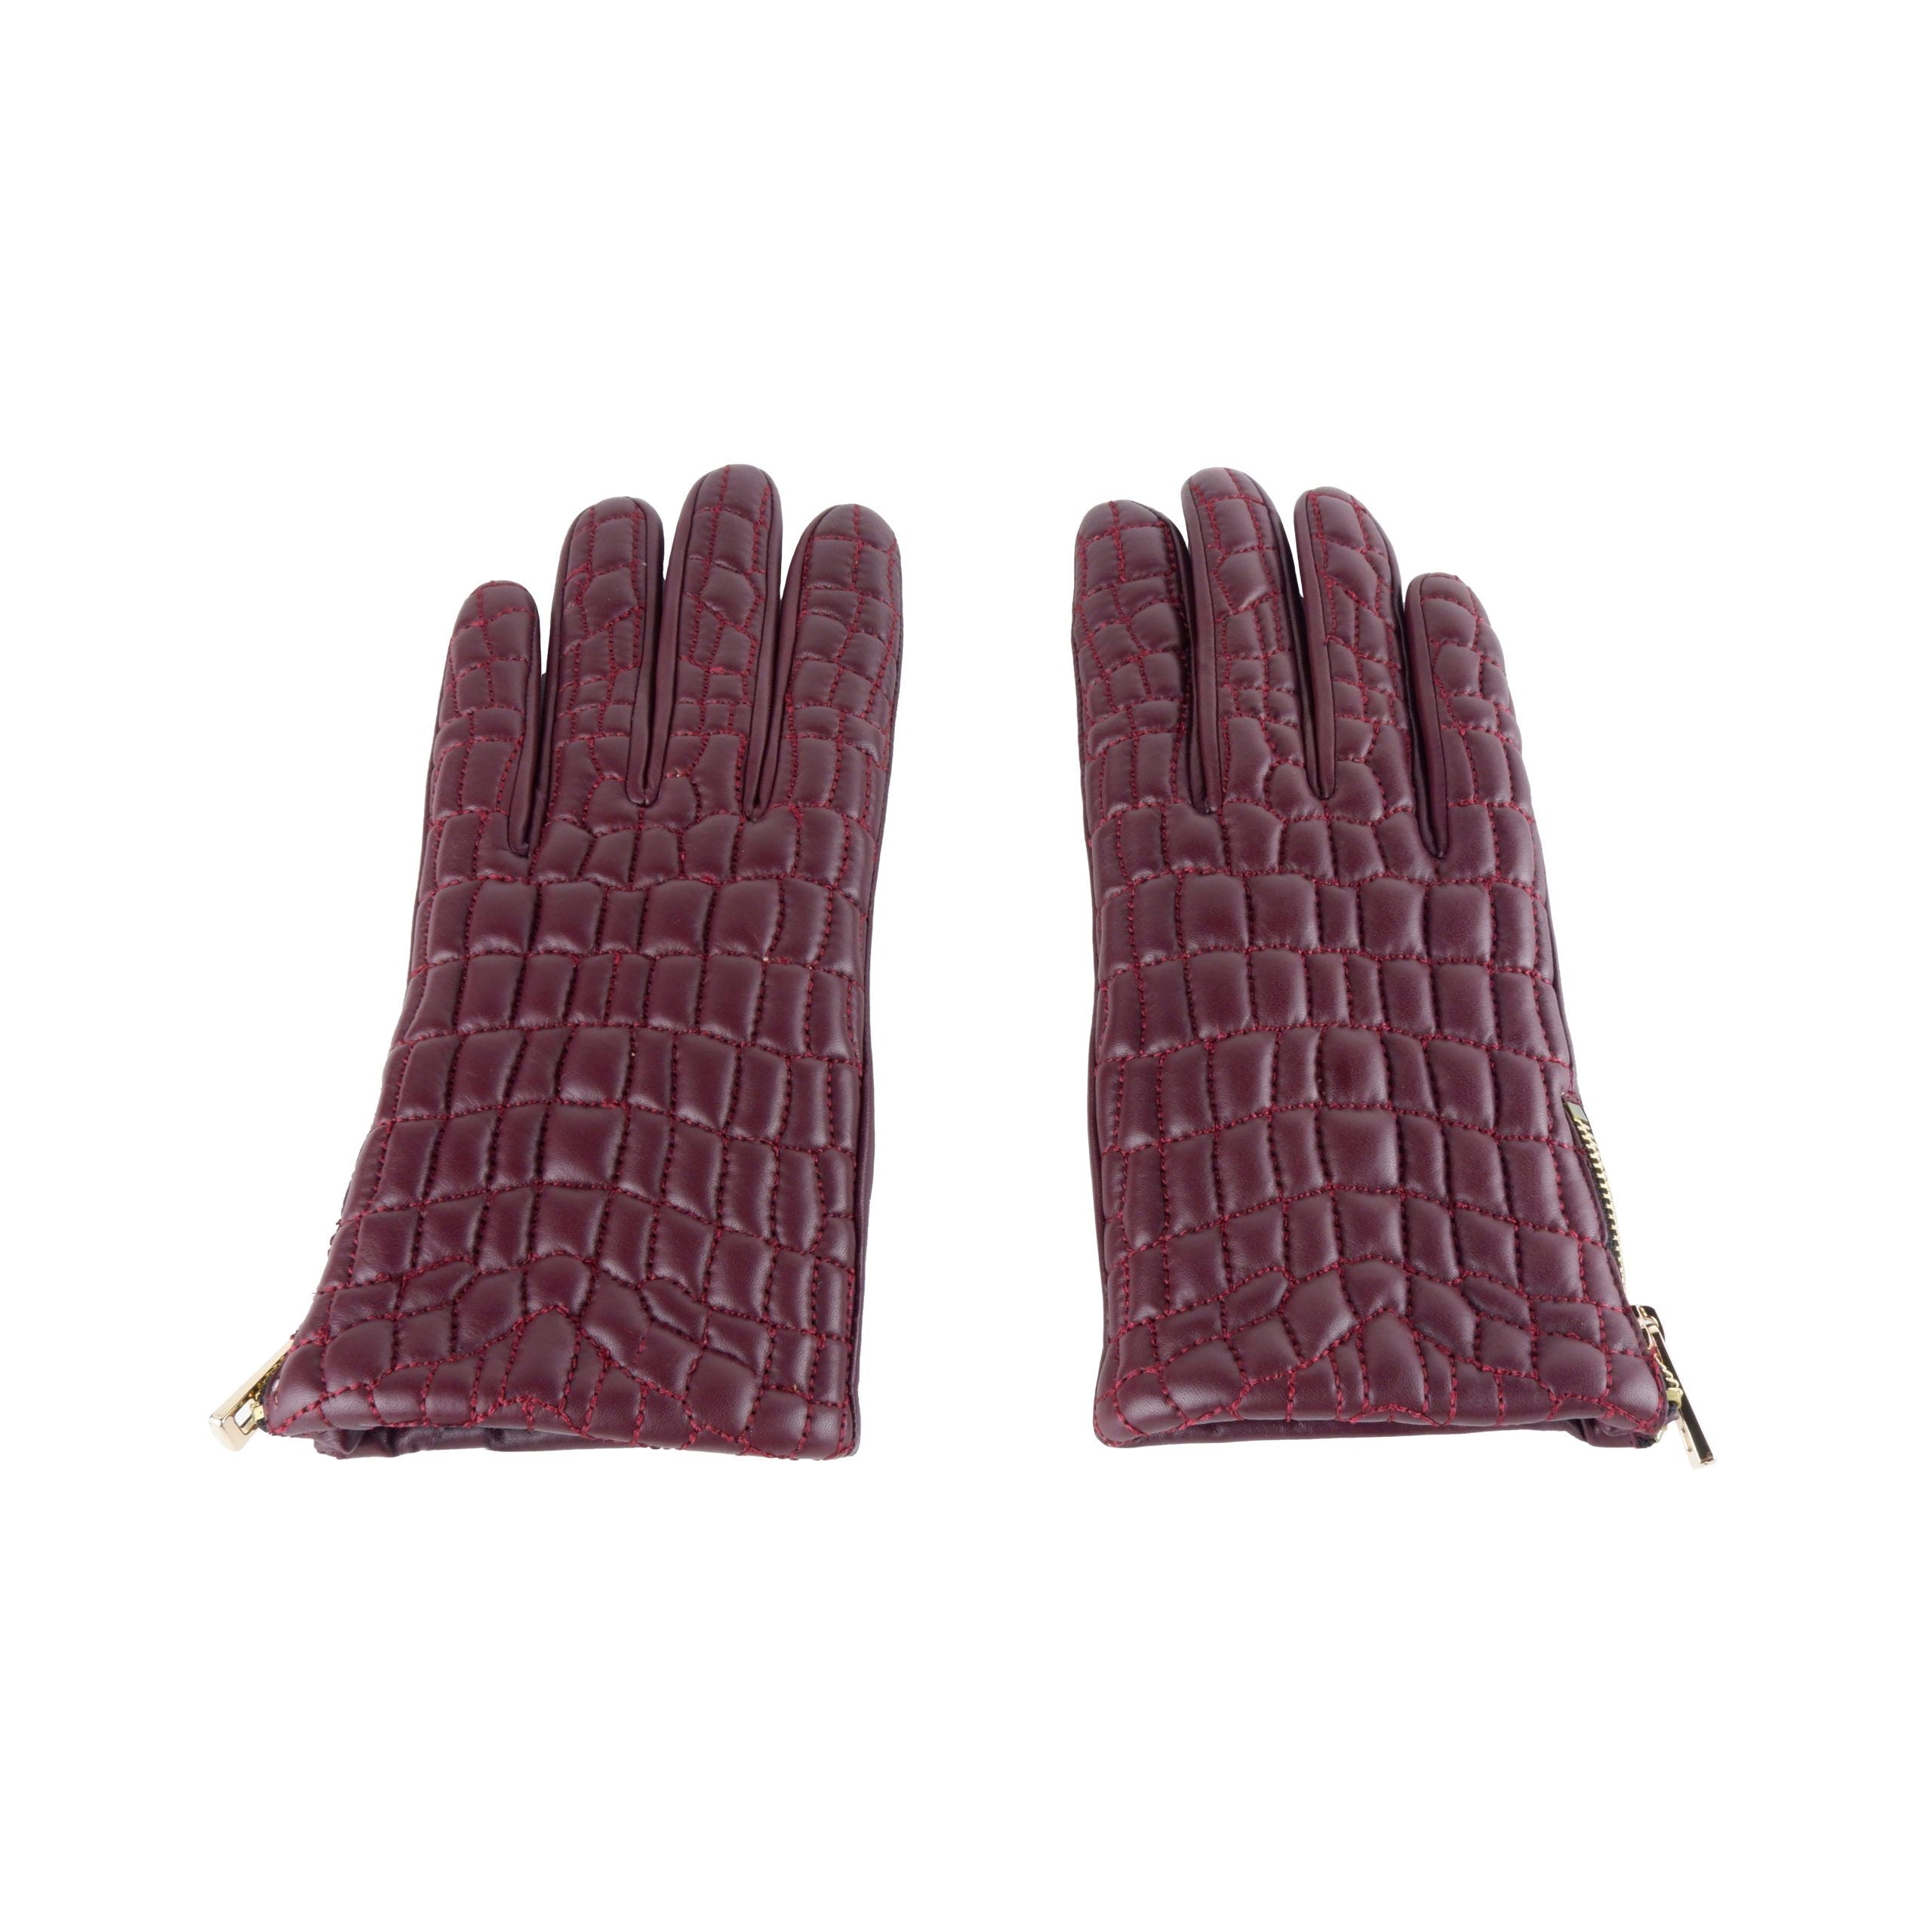 Cavalli Class Elegant Lady Gloves in Vibrant Red Leather